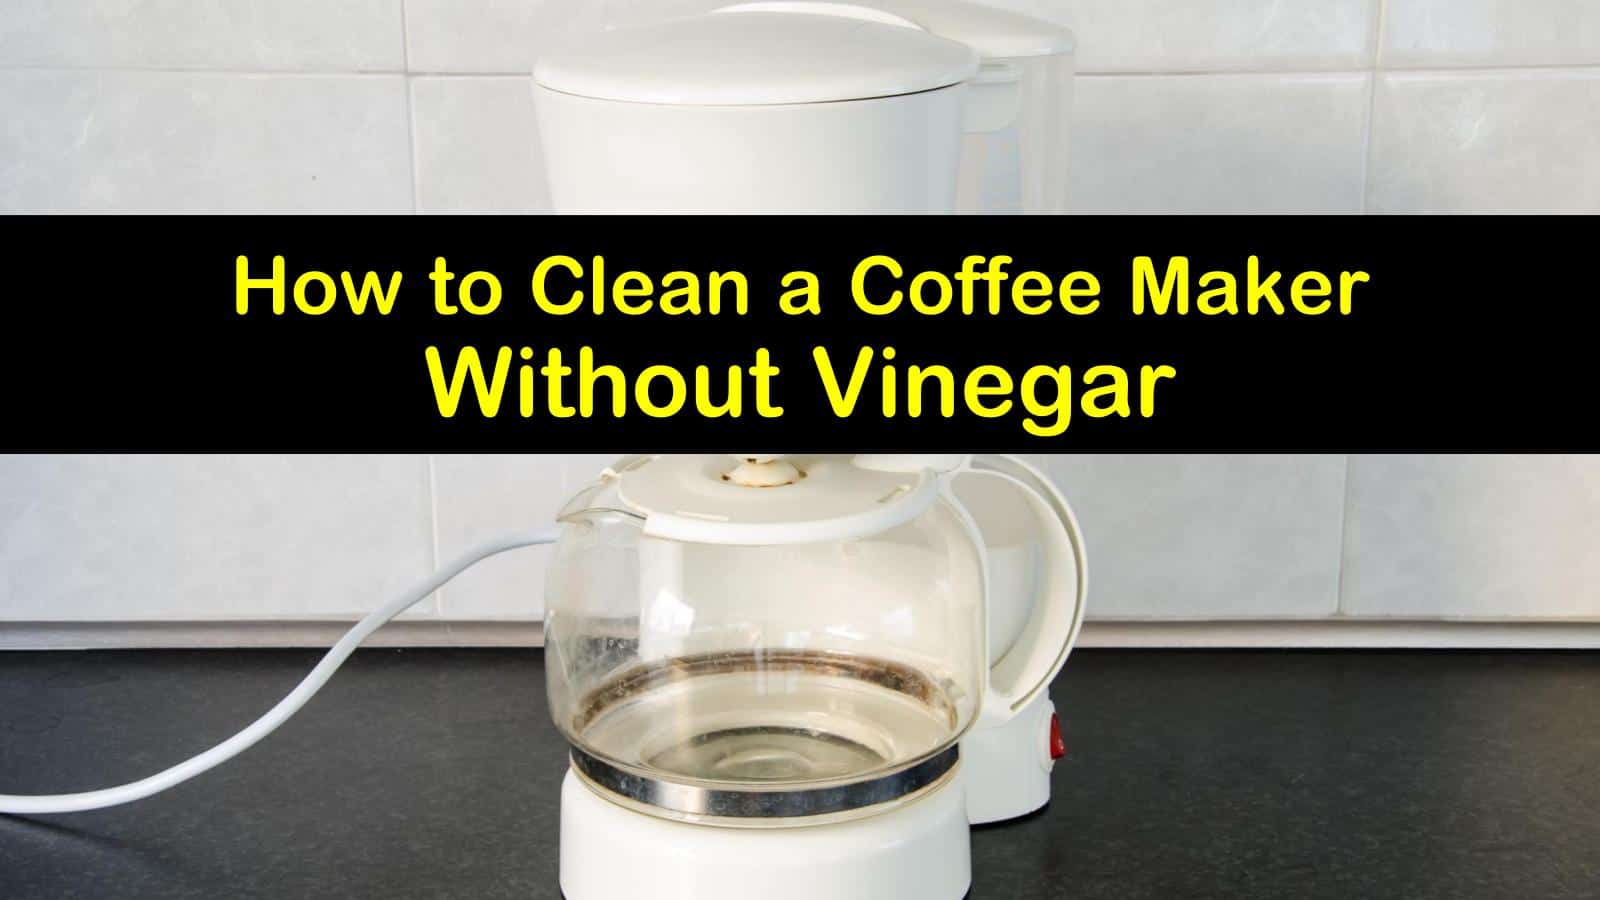 how to clean a coffee maker without vinegar titleimg1